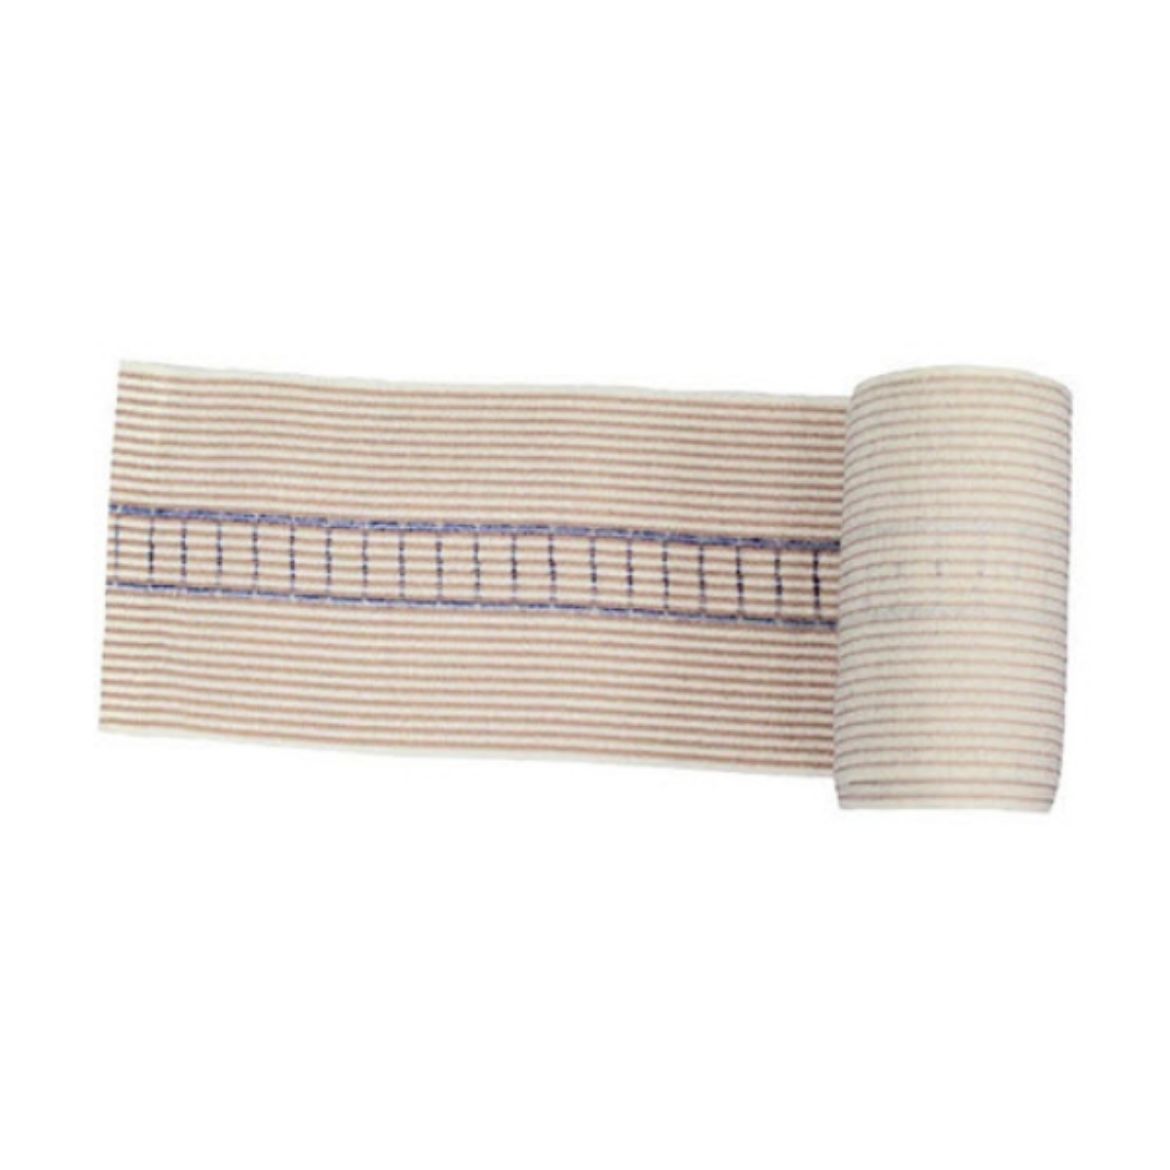 Picture of AEROFORM SNAKE BITE BANDAGE, WITH INDICATORS - 10CM X 10.5M (STRETCHED)